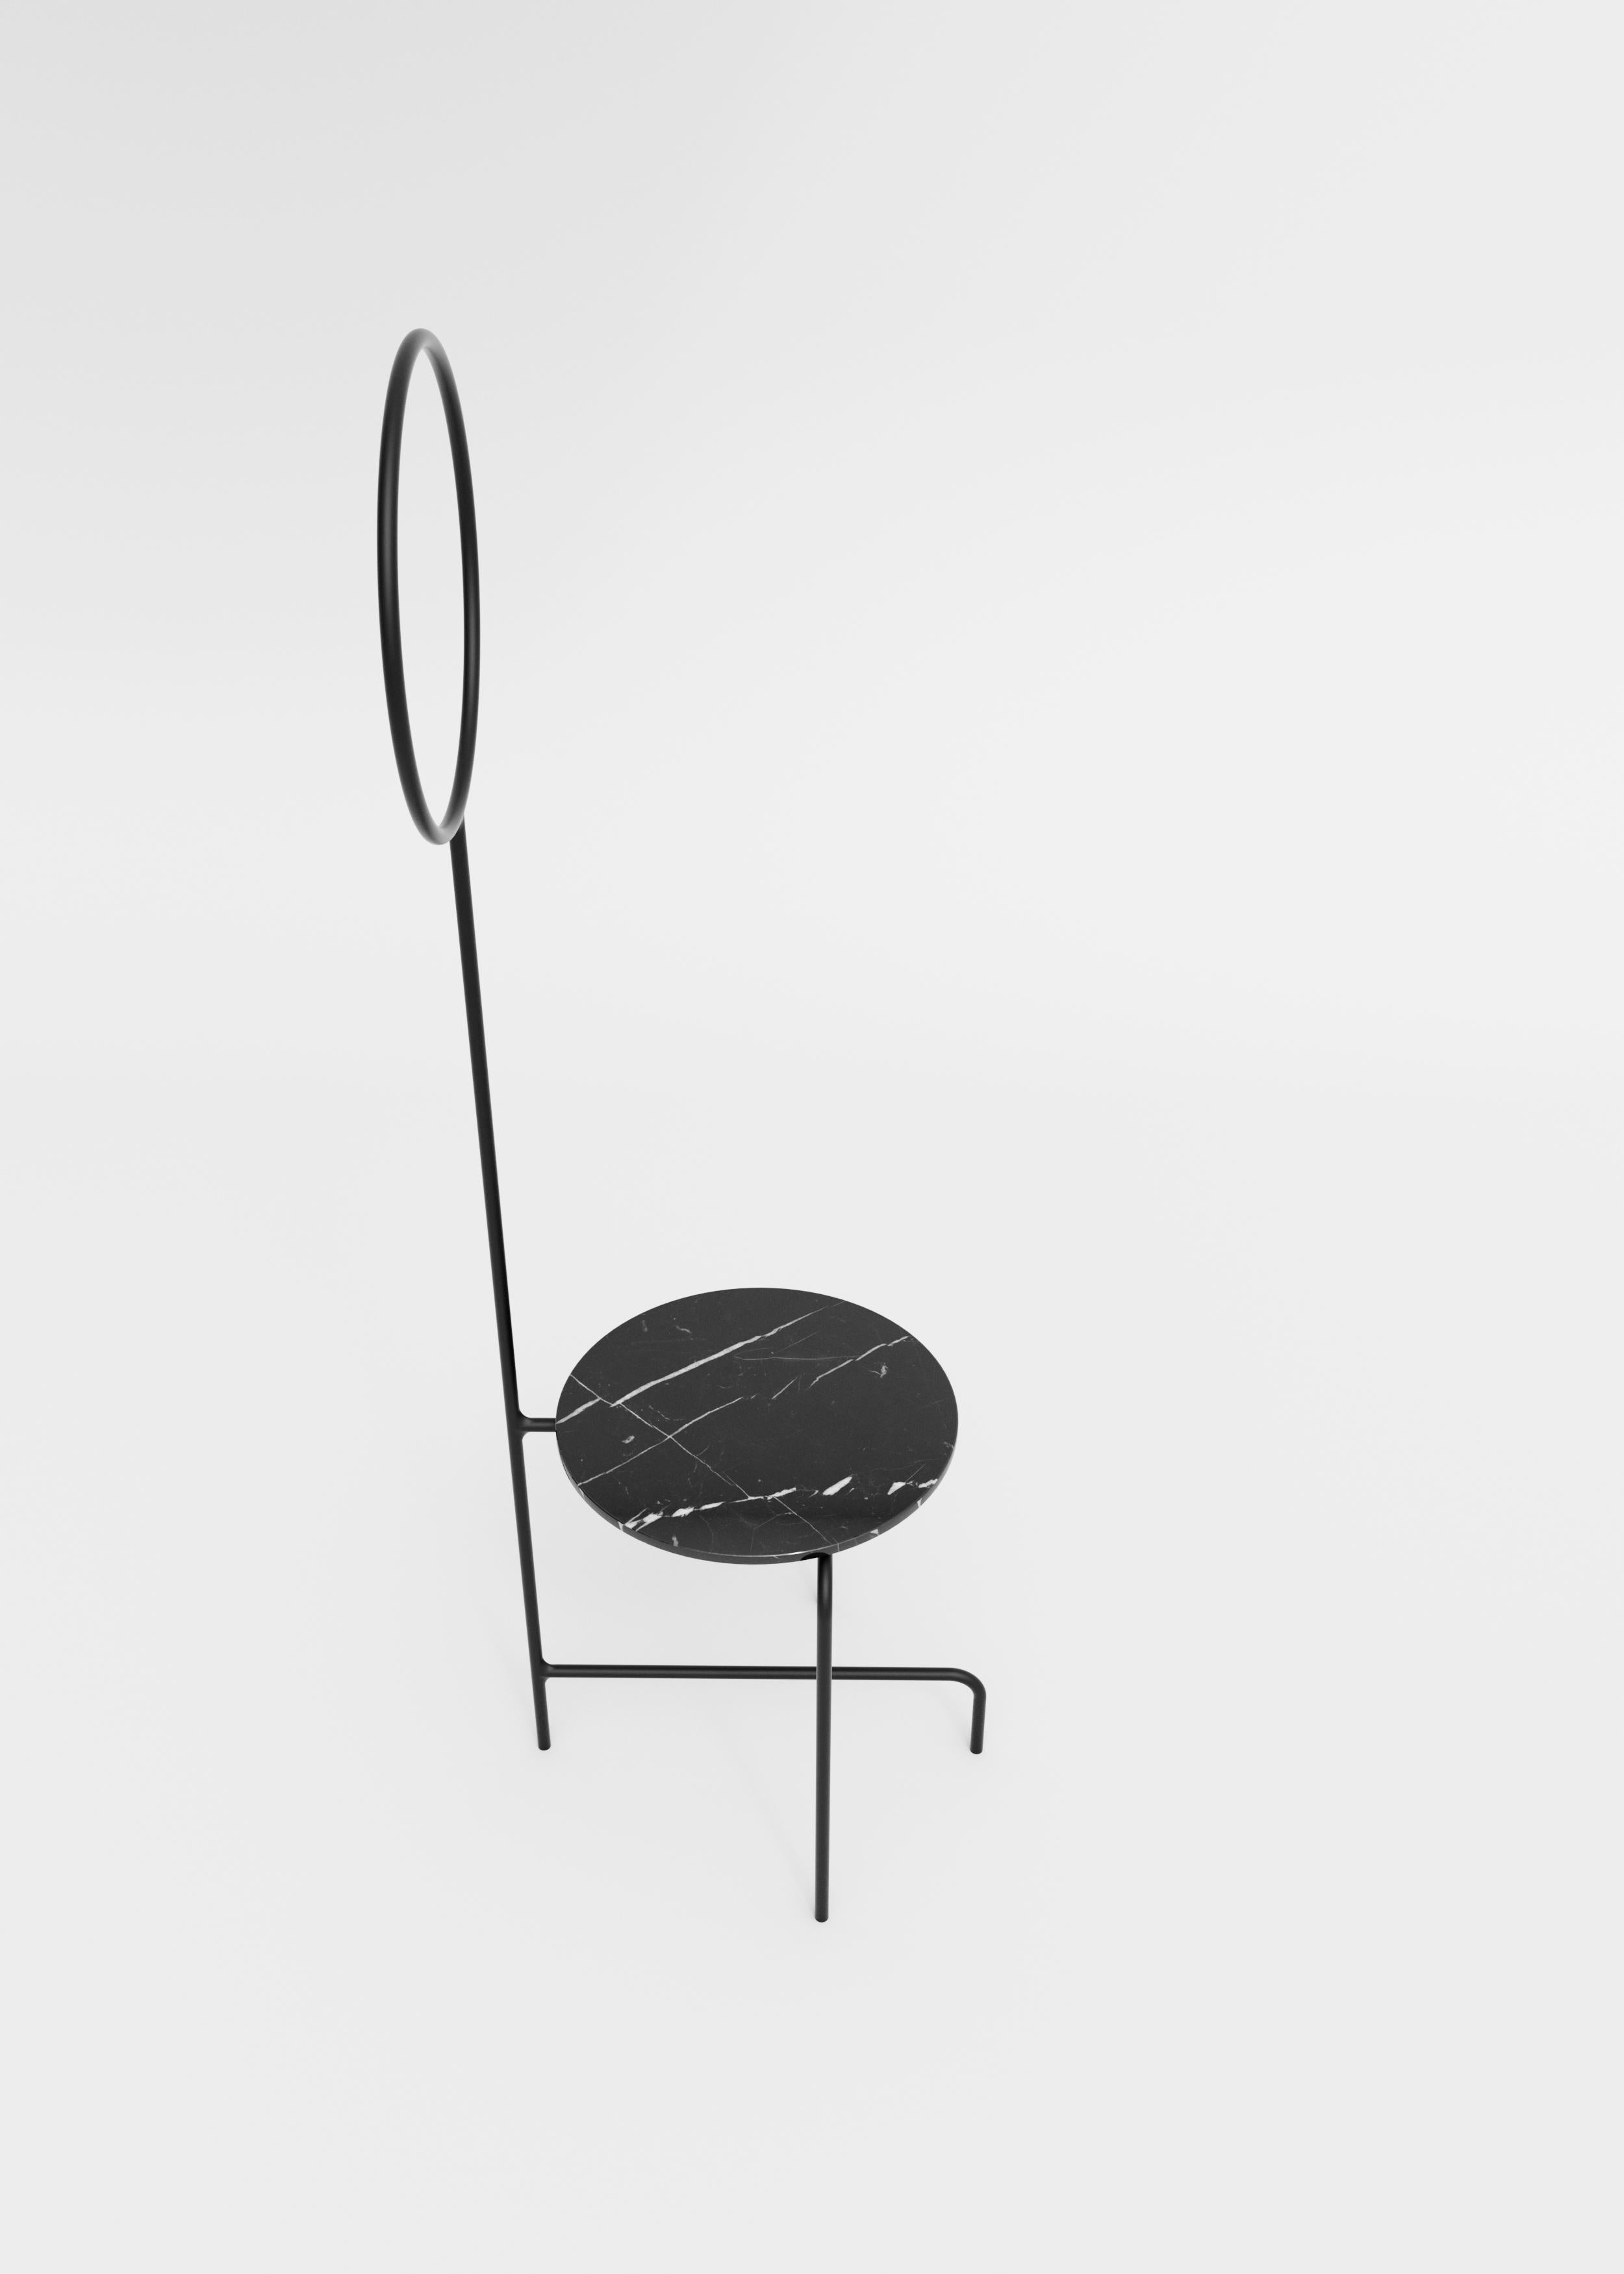 Brazilian Arauto, Sculptural Marble and Steel Chair by Pedro Paulo Venzon, 2015 For Sale